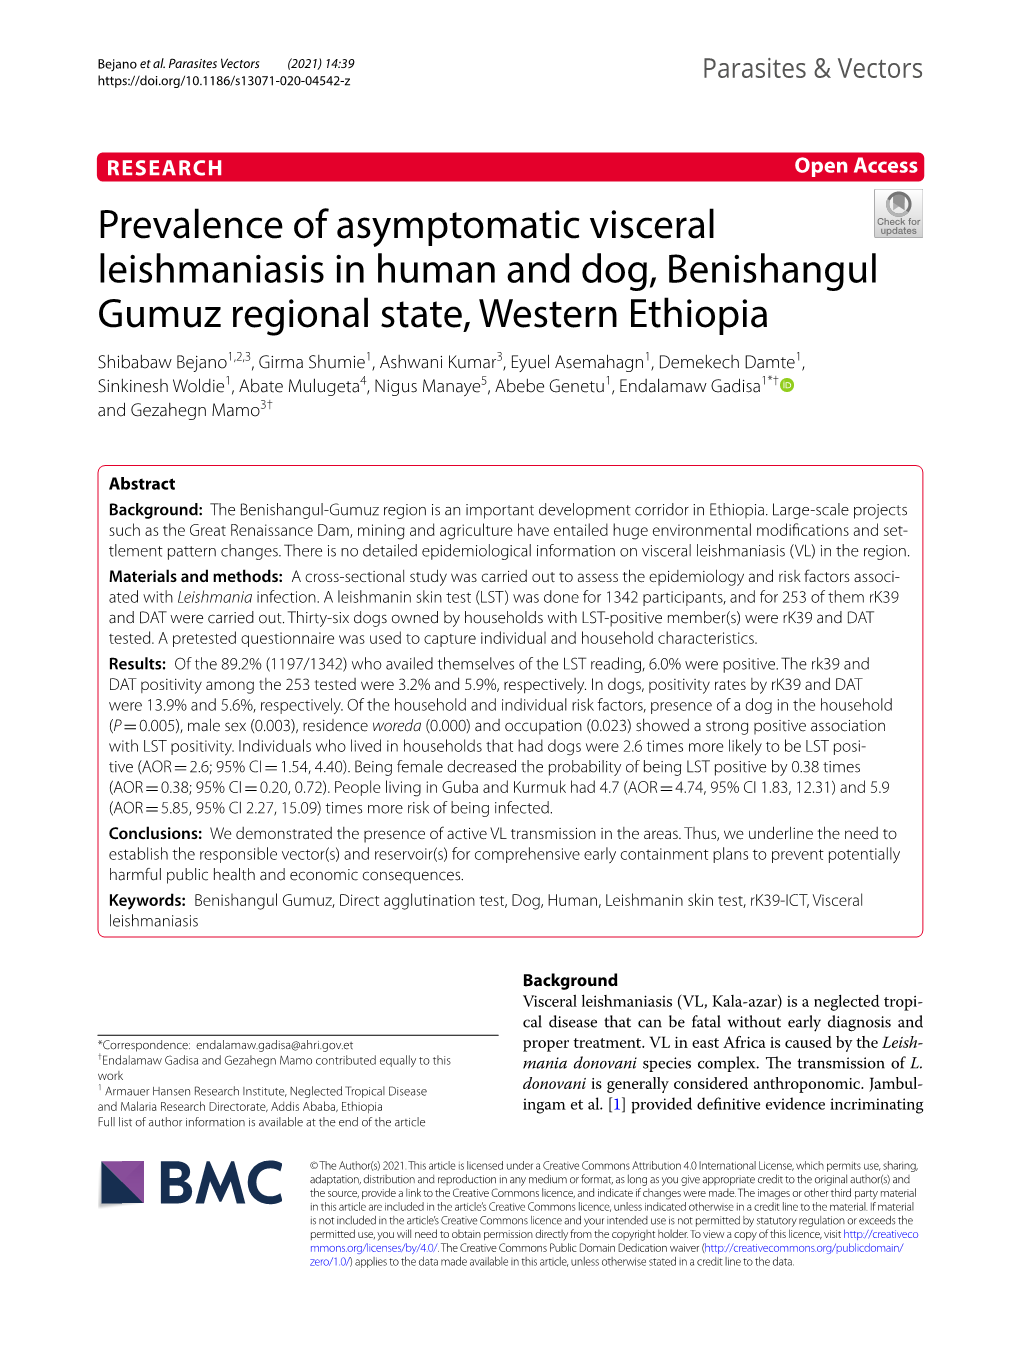 Prevalence of Asymptomatic Visceral Leishmaniasis in Human and Dog